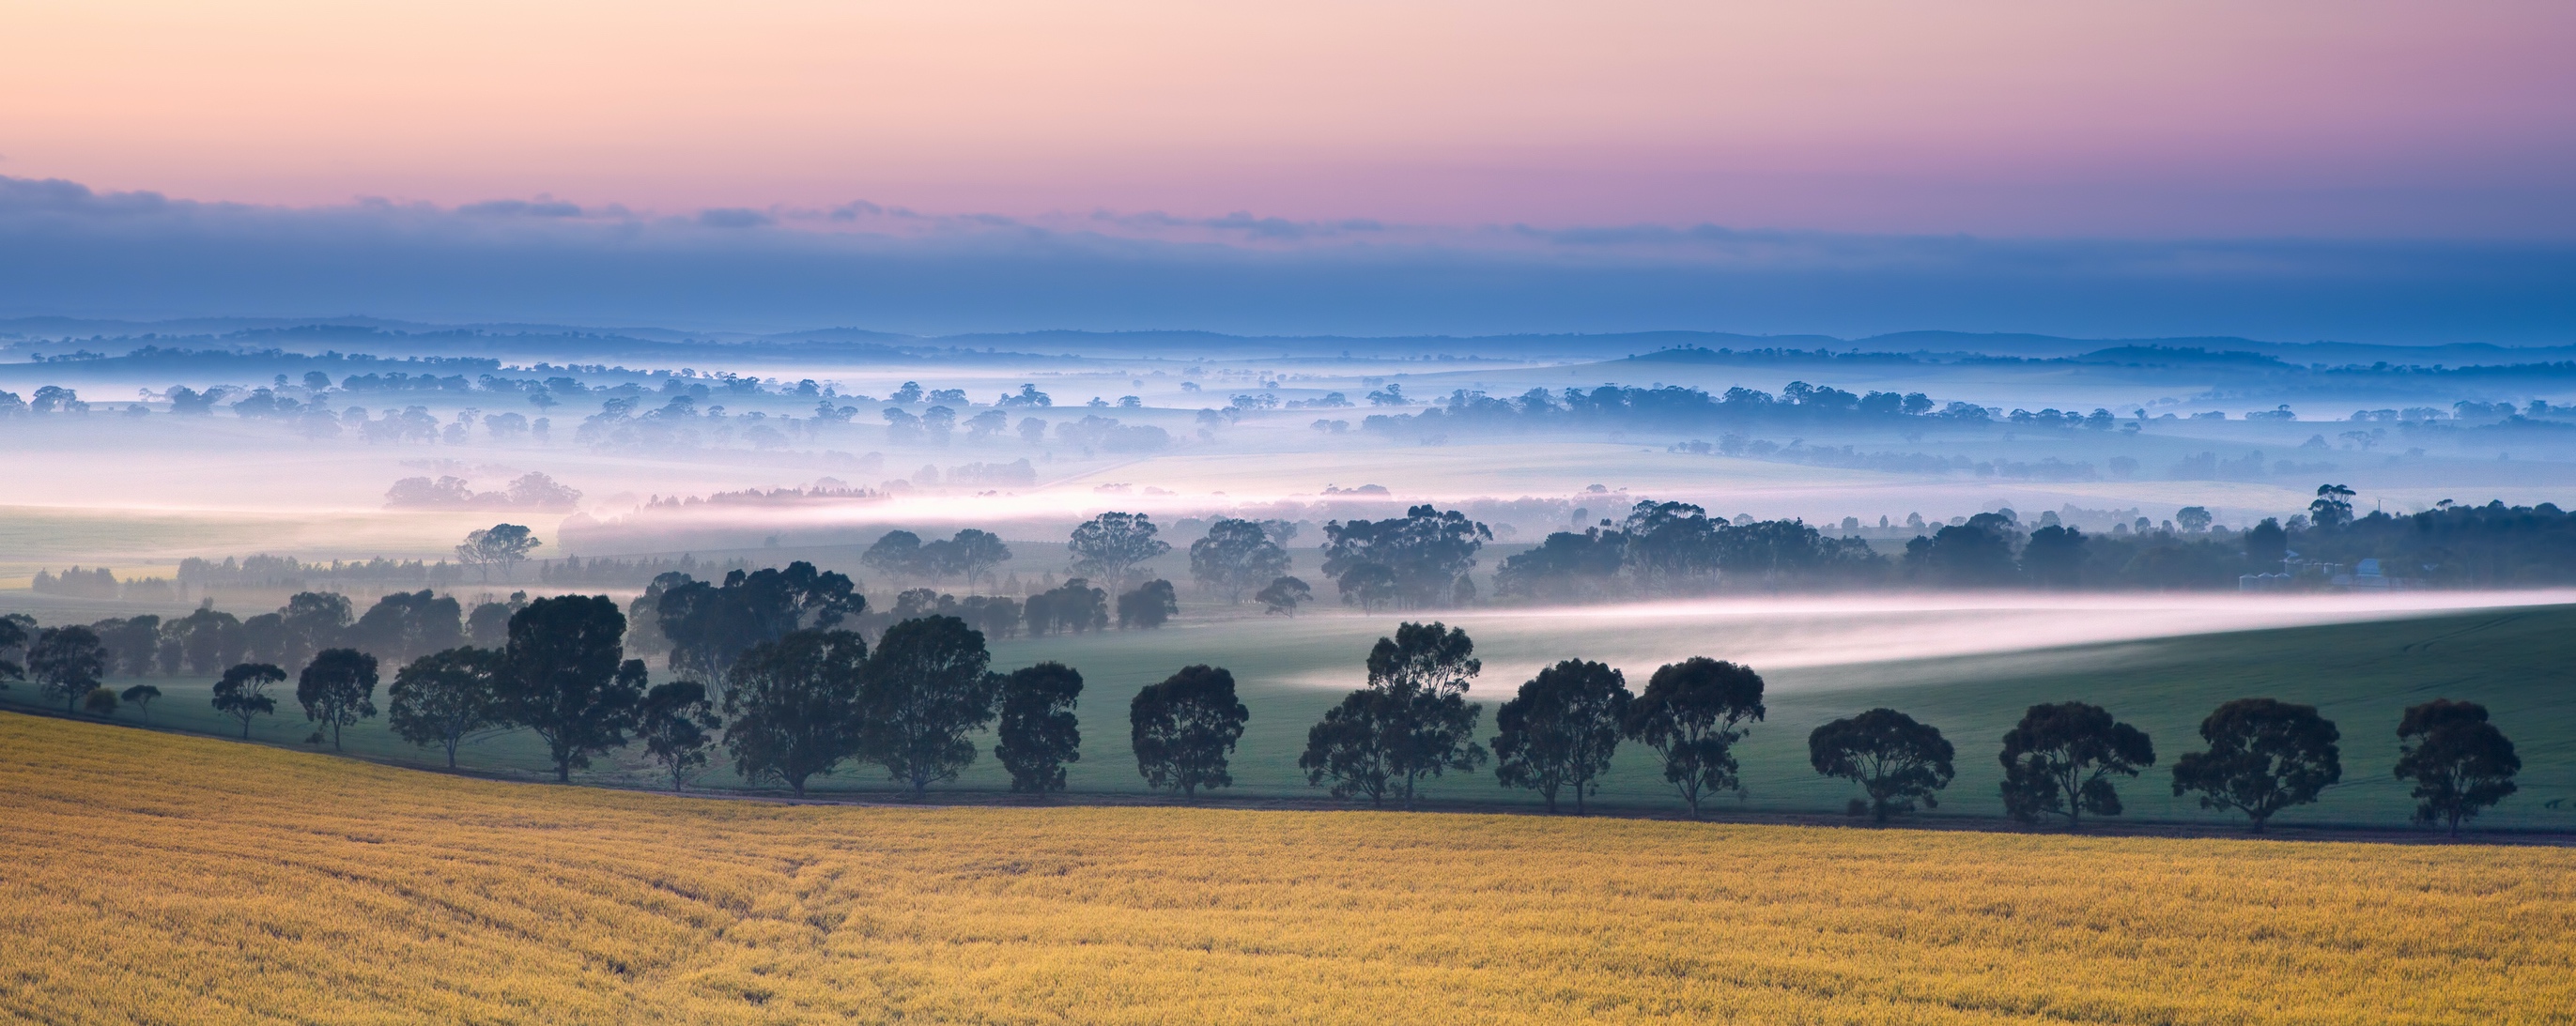 Sunrise in the Clare Valley, South Australia